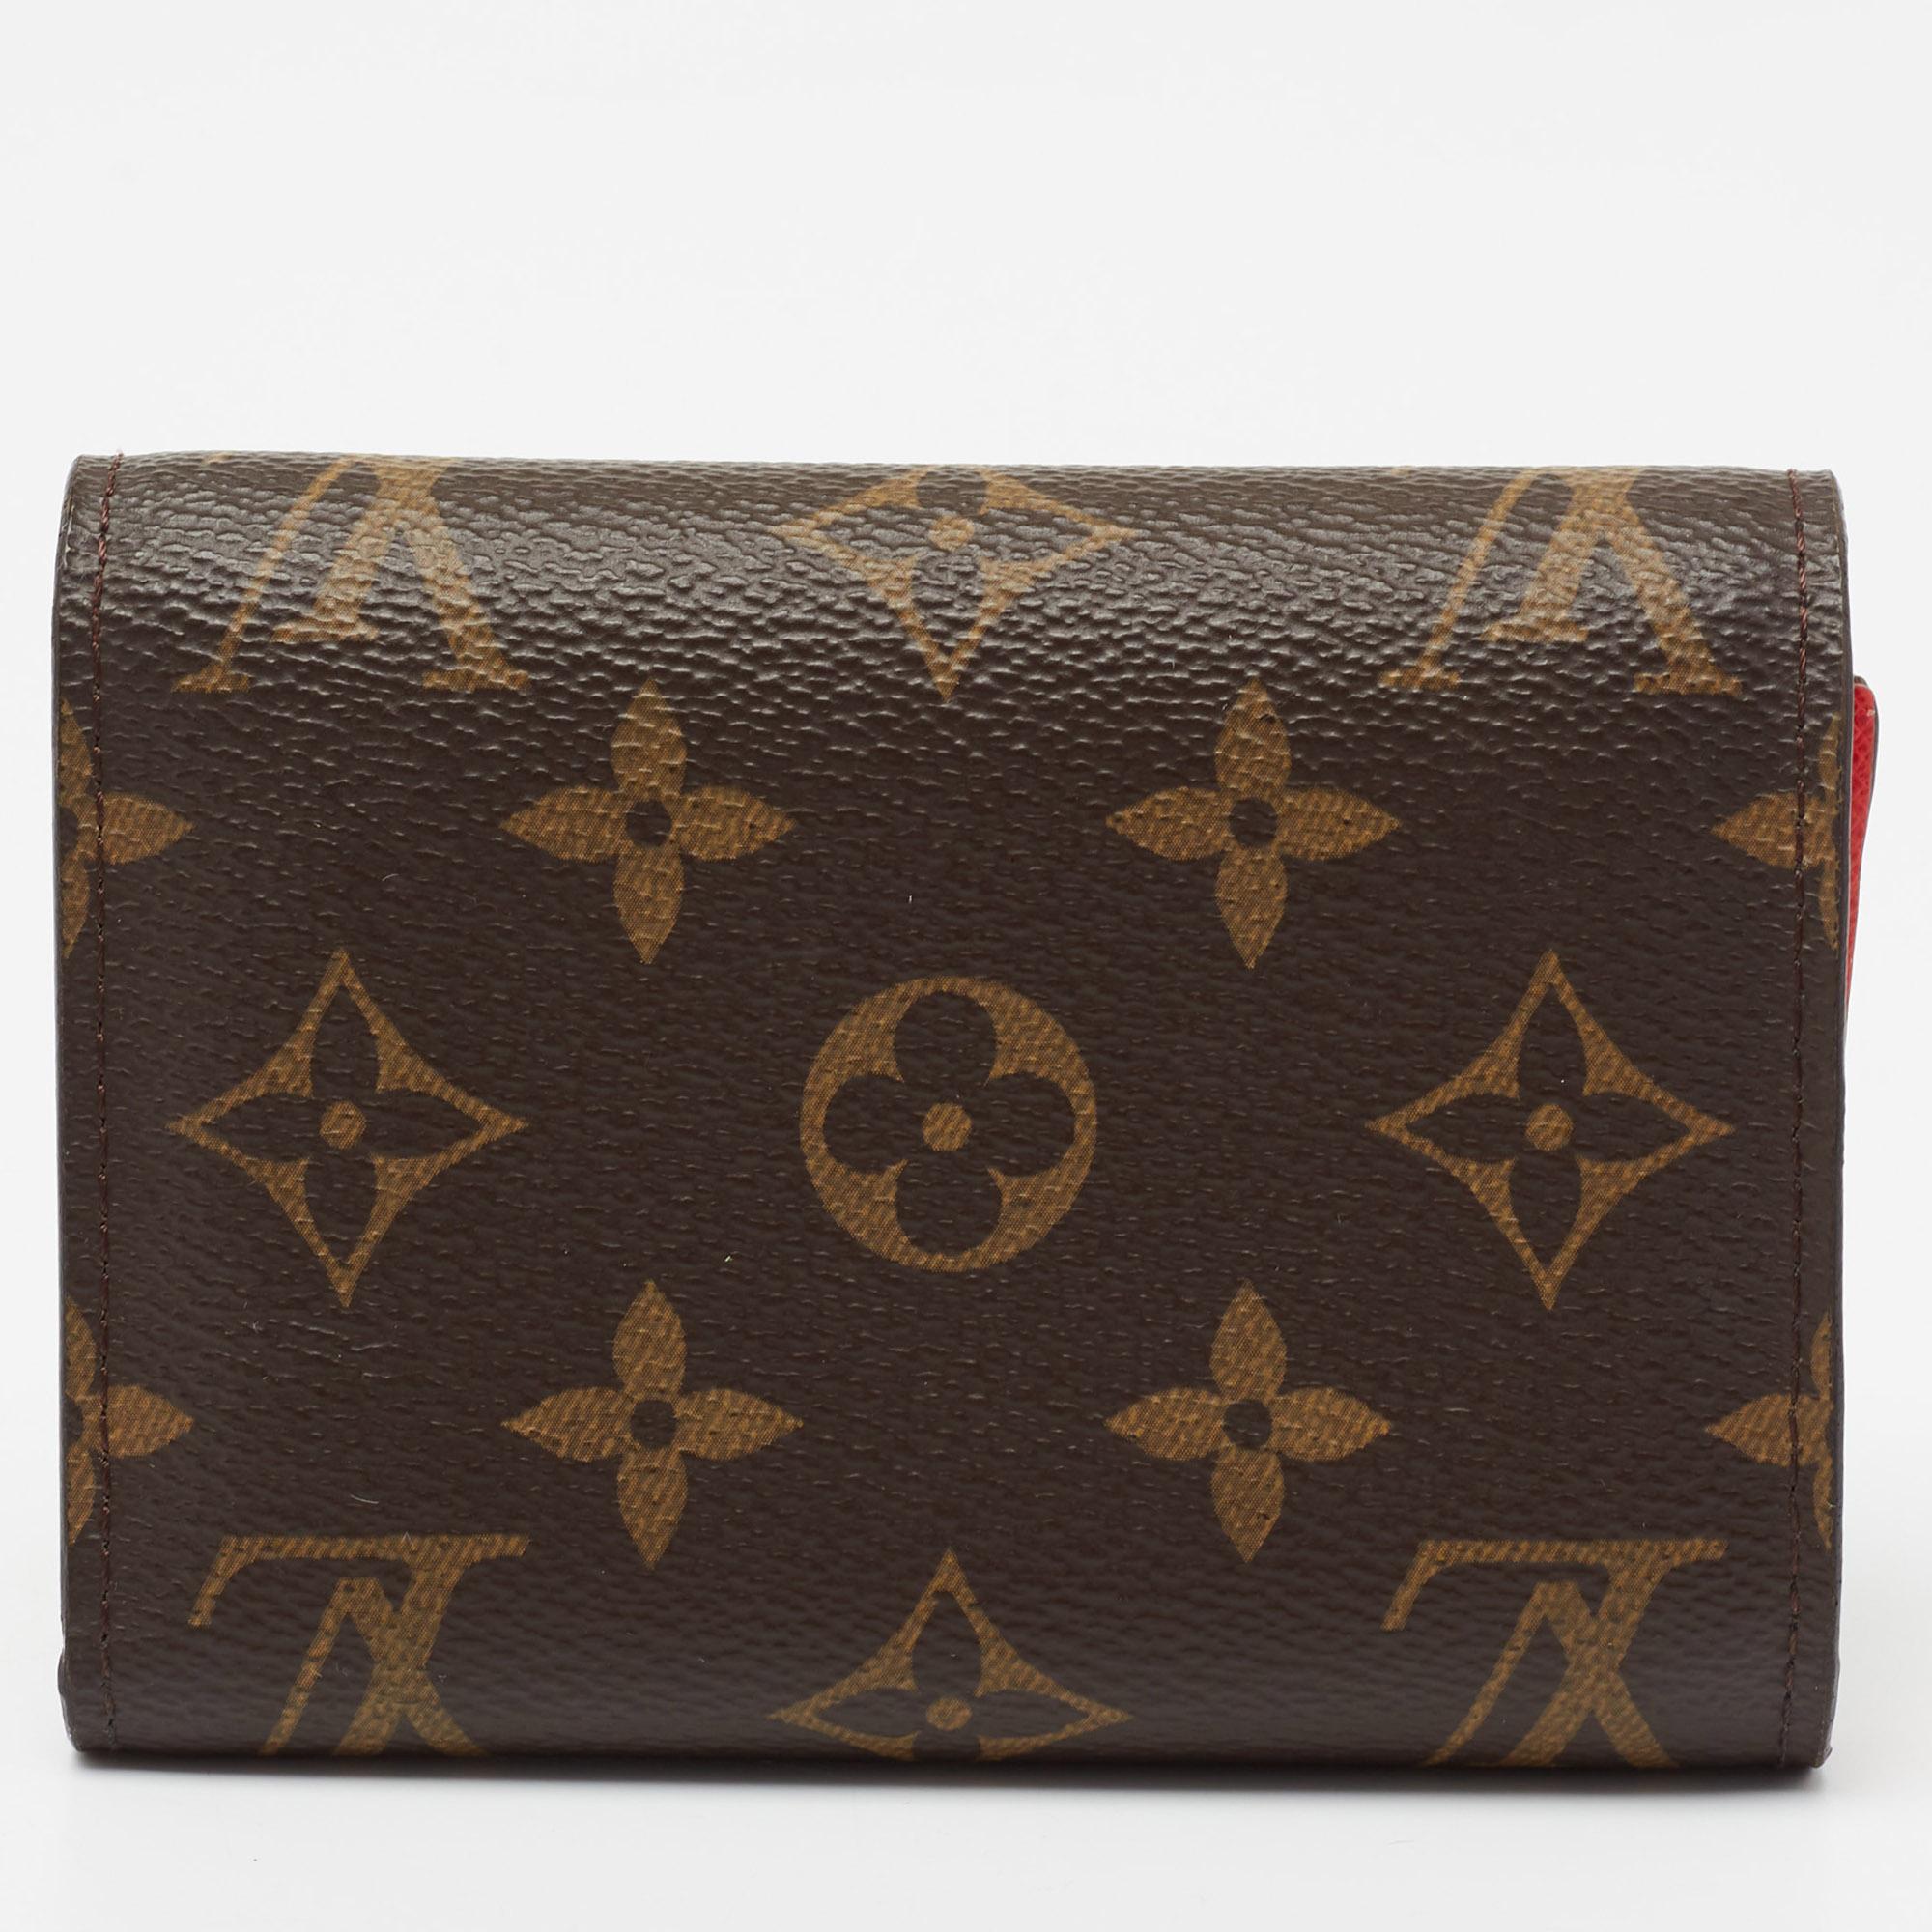 This Louis Vuitton wallet is playful and trendy in design. Created from the monogram canvas, it is made striking with a bird face on the front and flaunts gold-tone hardware. Its compartmentalized interior will keep your cash and card in order.

